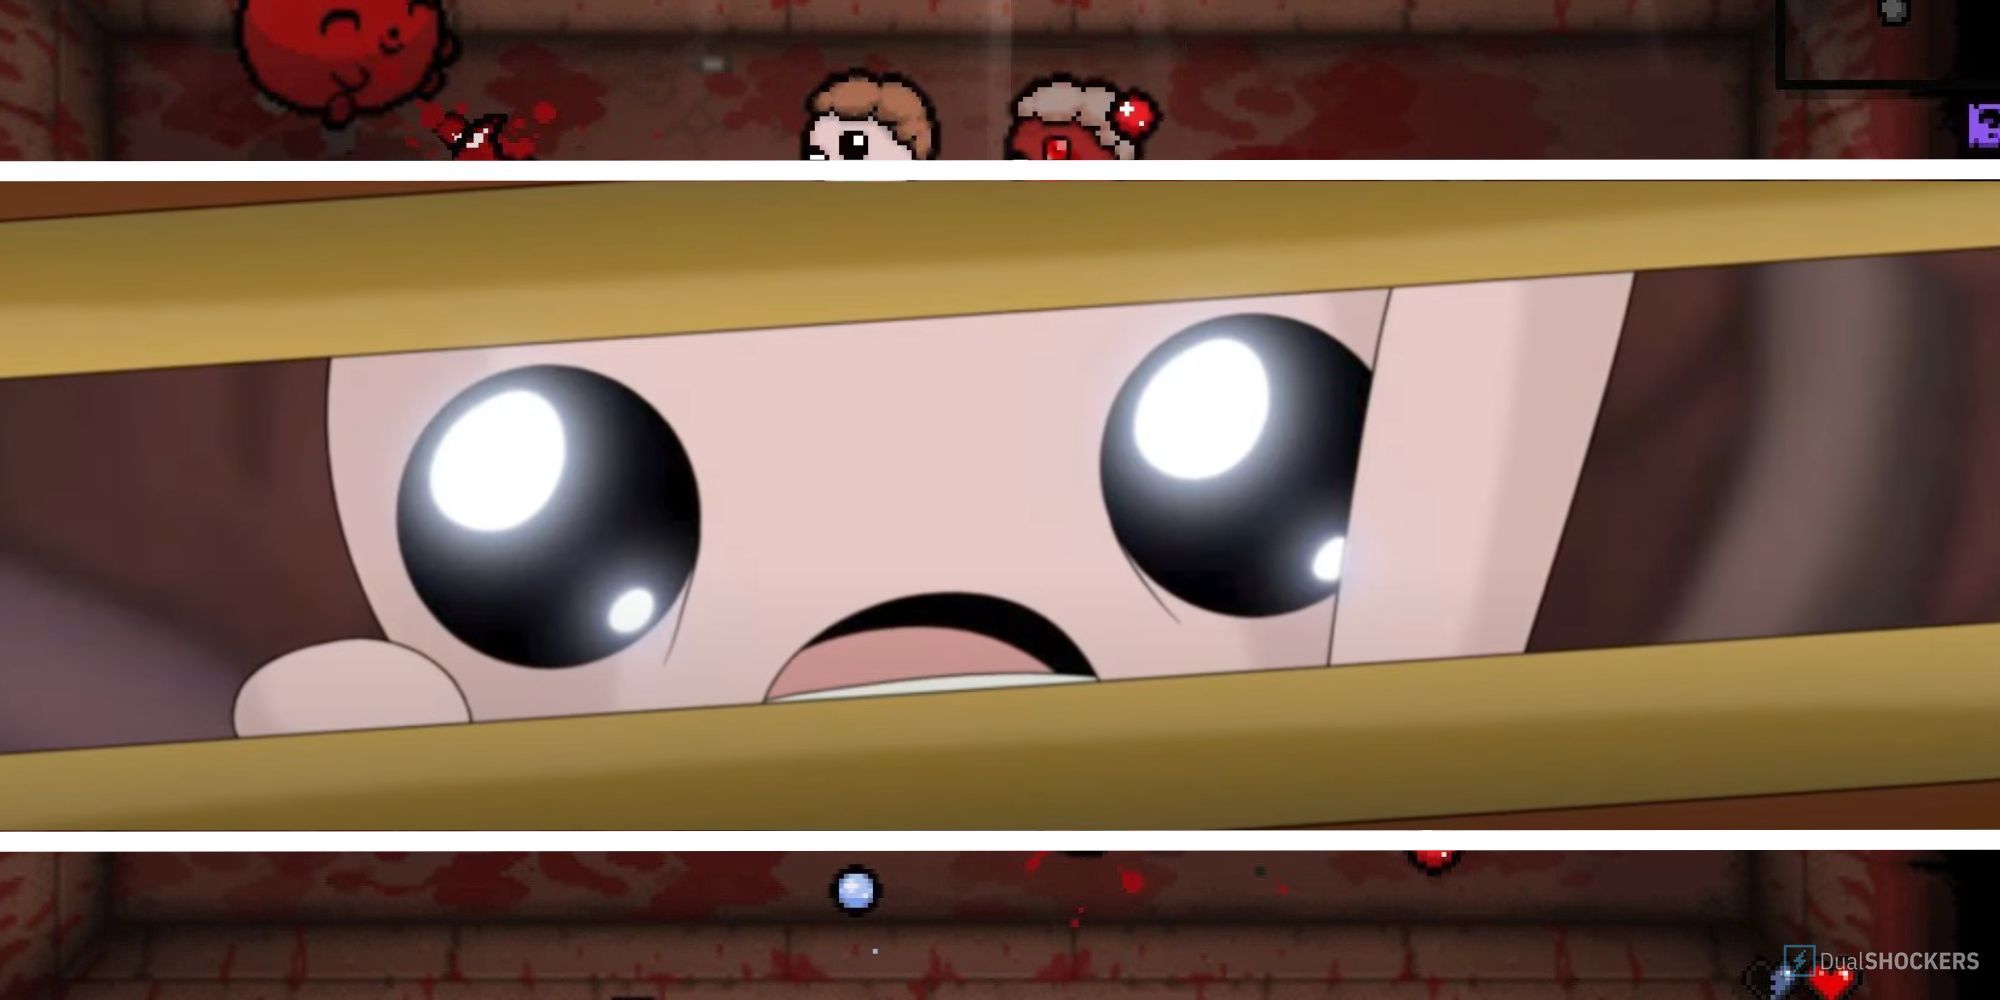 An image of Isaac looking into a chest imposed over gameplay with Jacob and Essau